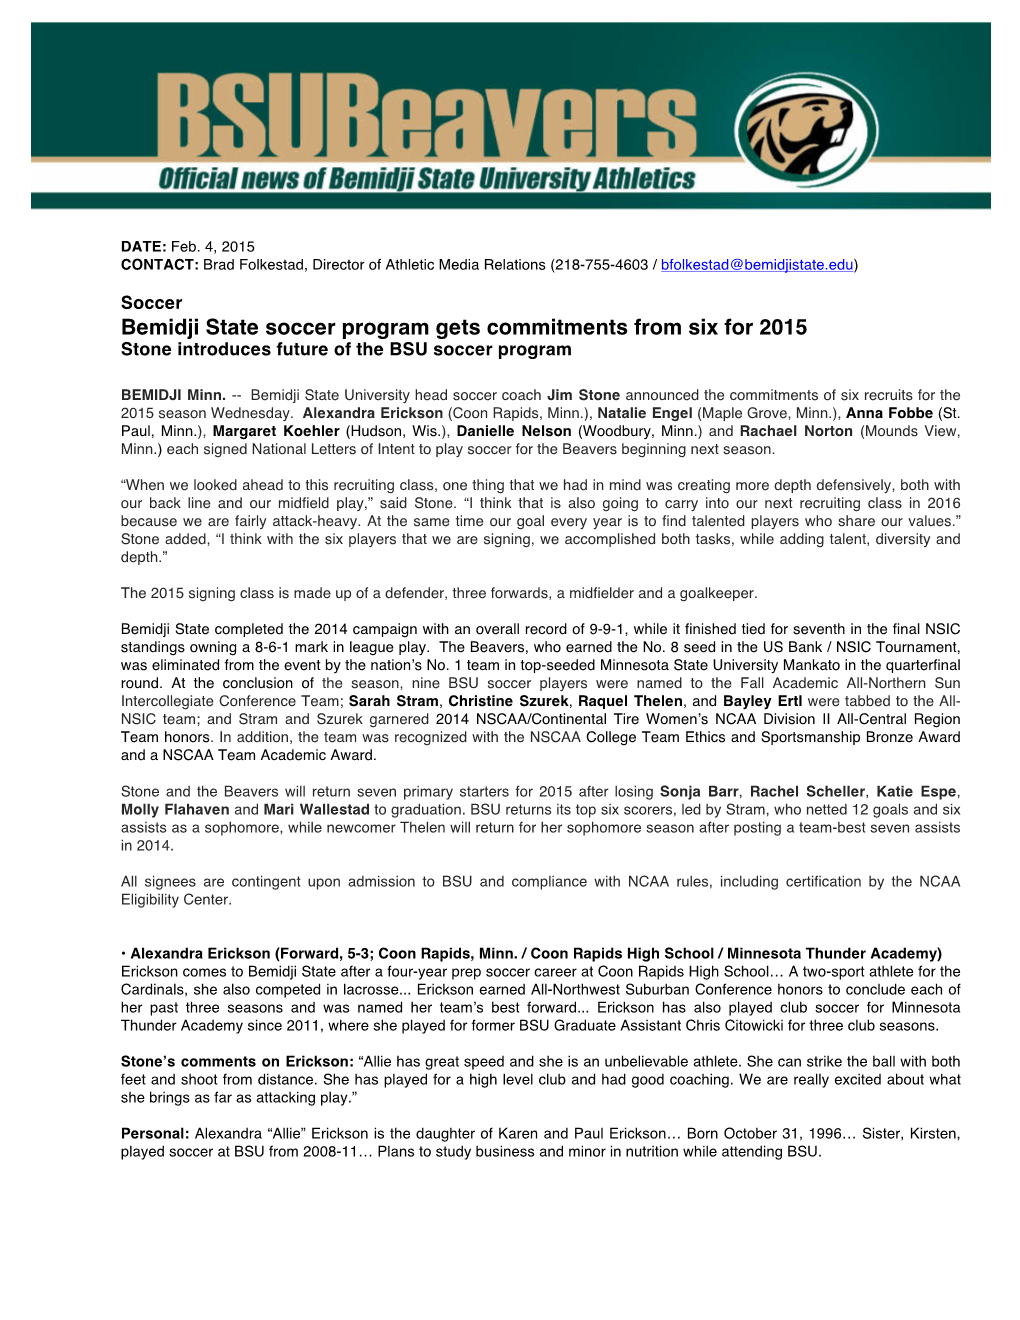 Bemidji State Soccer Program Gets Commitments from Six for 2015 Stone Introduces Future of the BSU Soccer Program